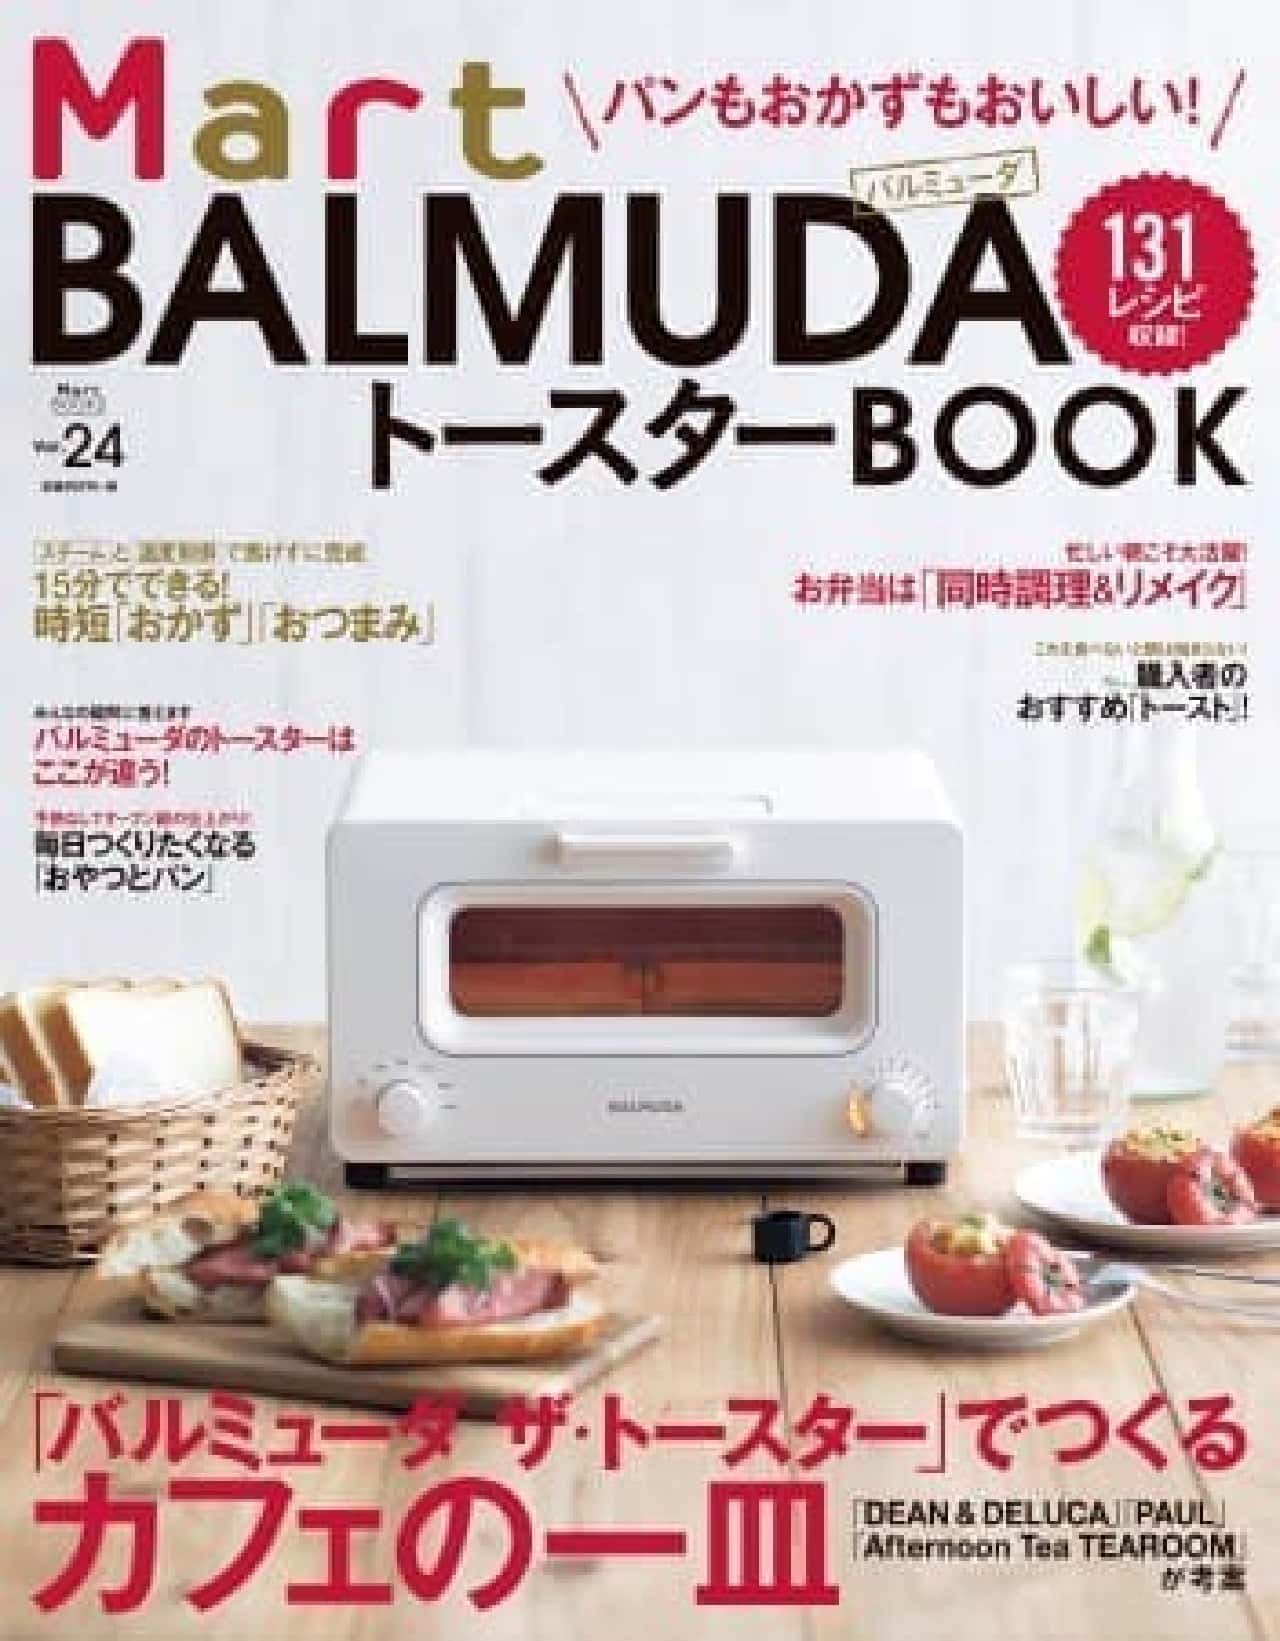 Easy bread and side dishes--Recipes for "Balmuda The Toaster" from Mart